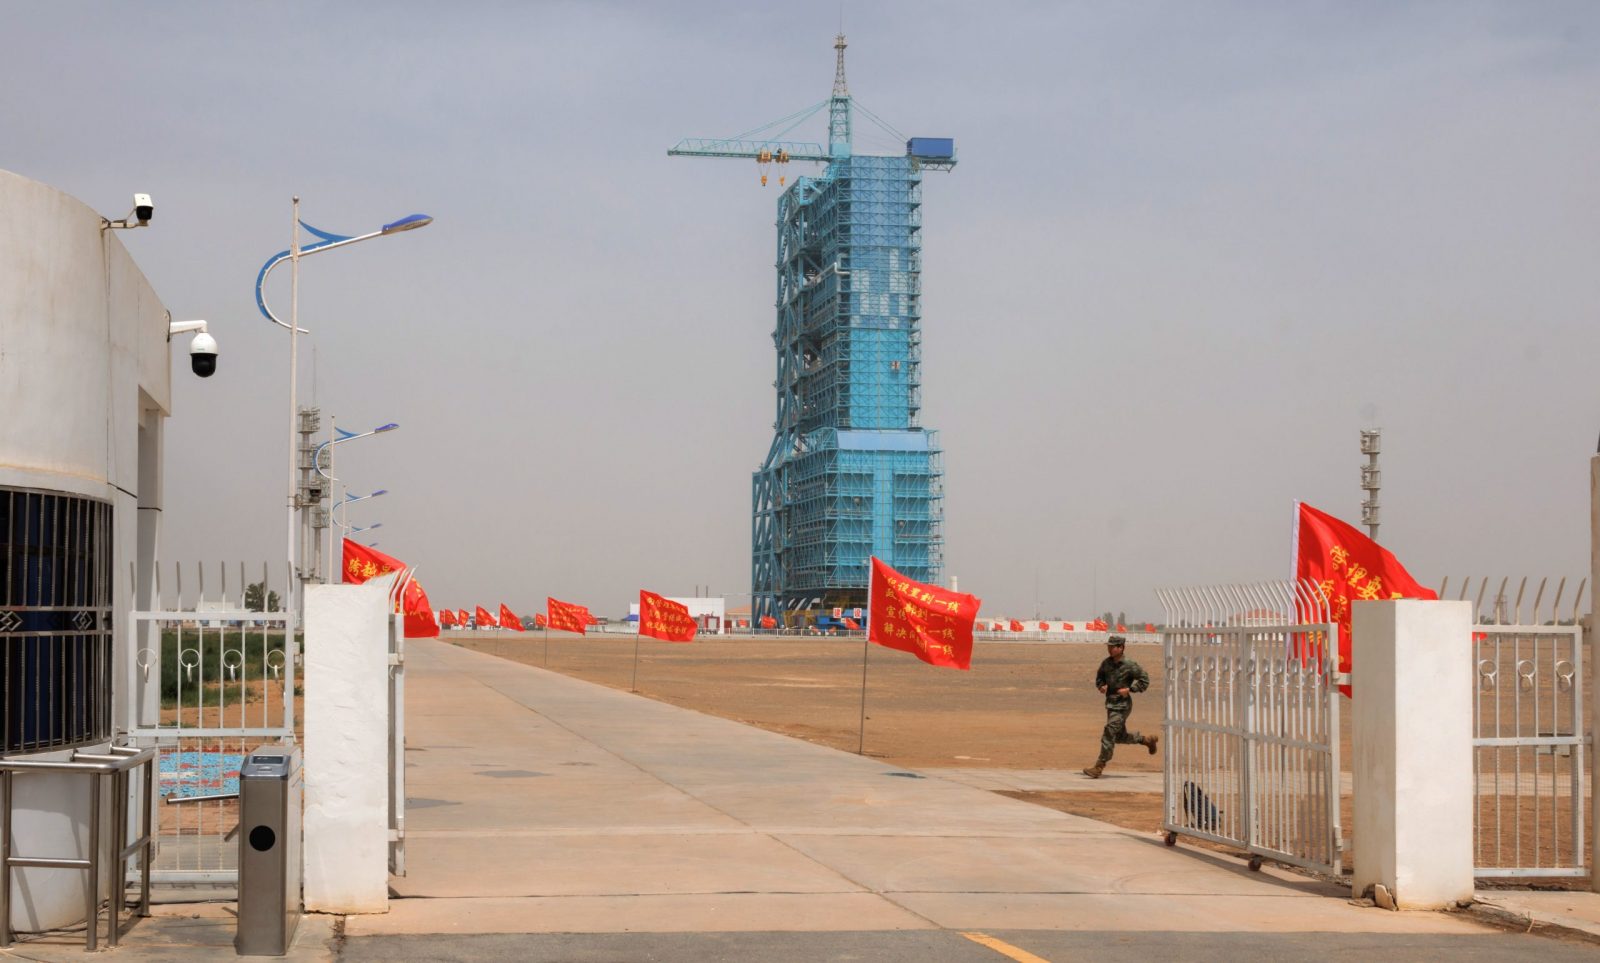 epa10661519 A member of People's Liberation Army (PLA) runs on the site of Shenzhou-16 manned space flight mission on the eve of launching in Jiuquan, Gansu province, China, 29 May 2023. The Shenzhou-16 manned space flight mission is expected to be launched on 30 May, and will transport three Chinese astronauts to the Tiangong space station.  EPA/ALEX PLAVEVSKI